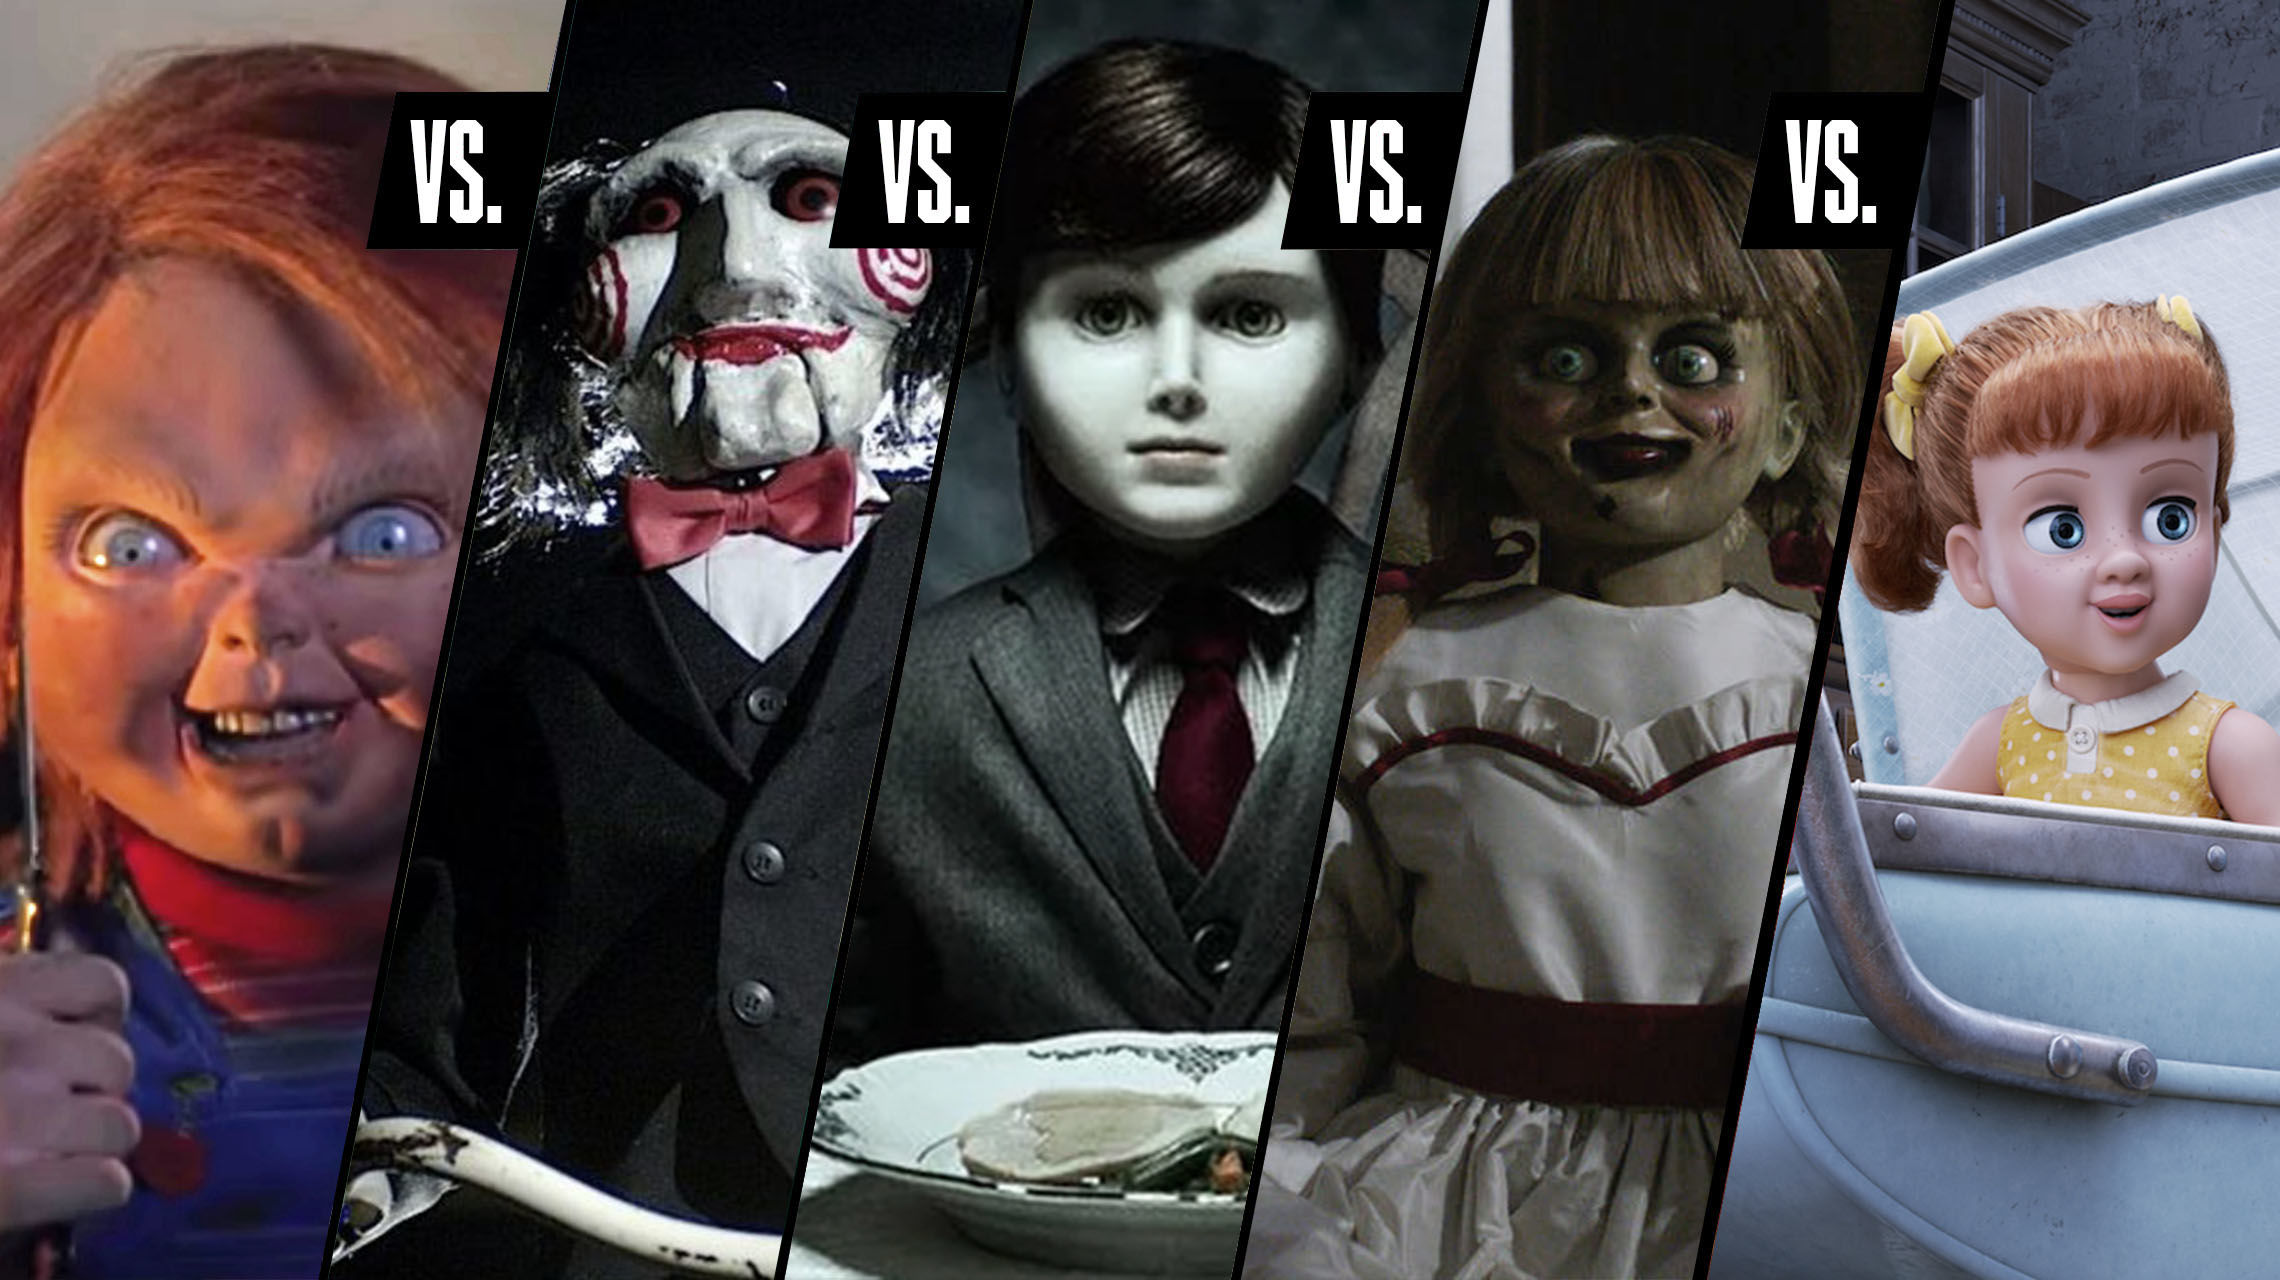 Top 20 Scariest Dolls In Horror Movies vlr.eng.br